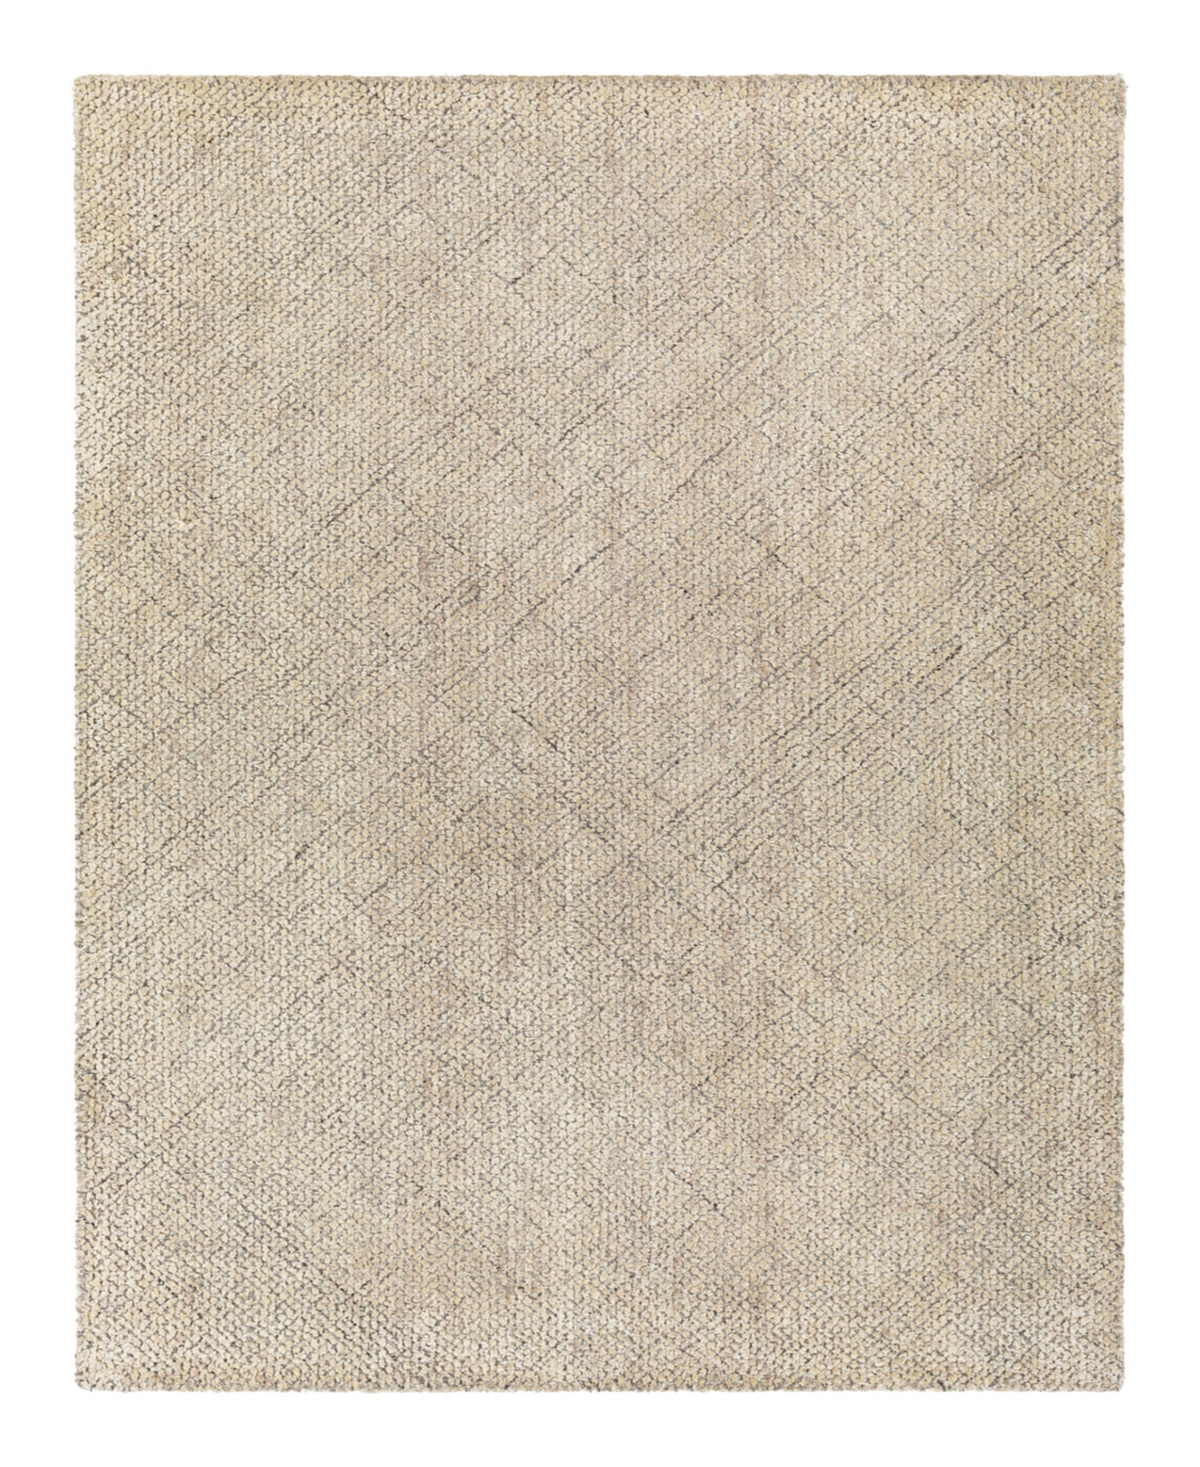 Surya Helen Hle-2302 Area Rug, 6' X 9' In Gray Tan